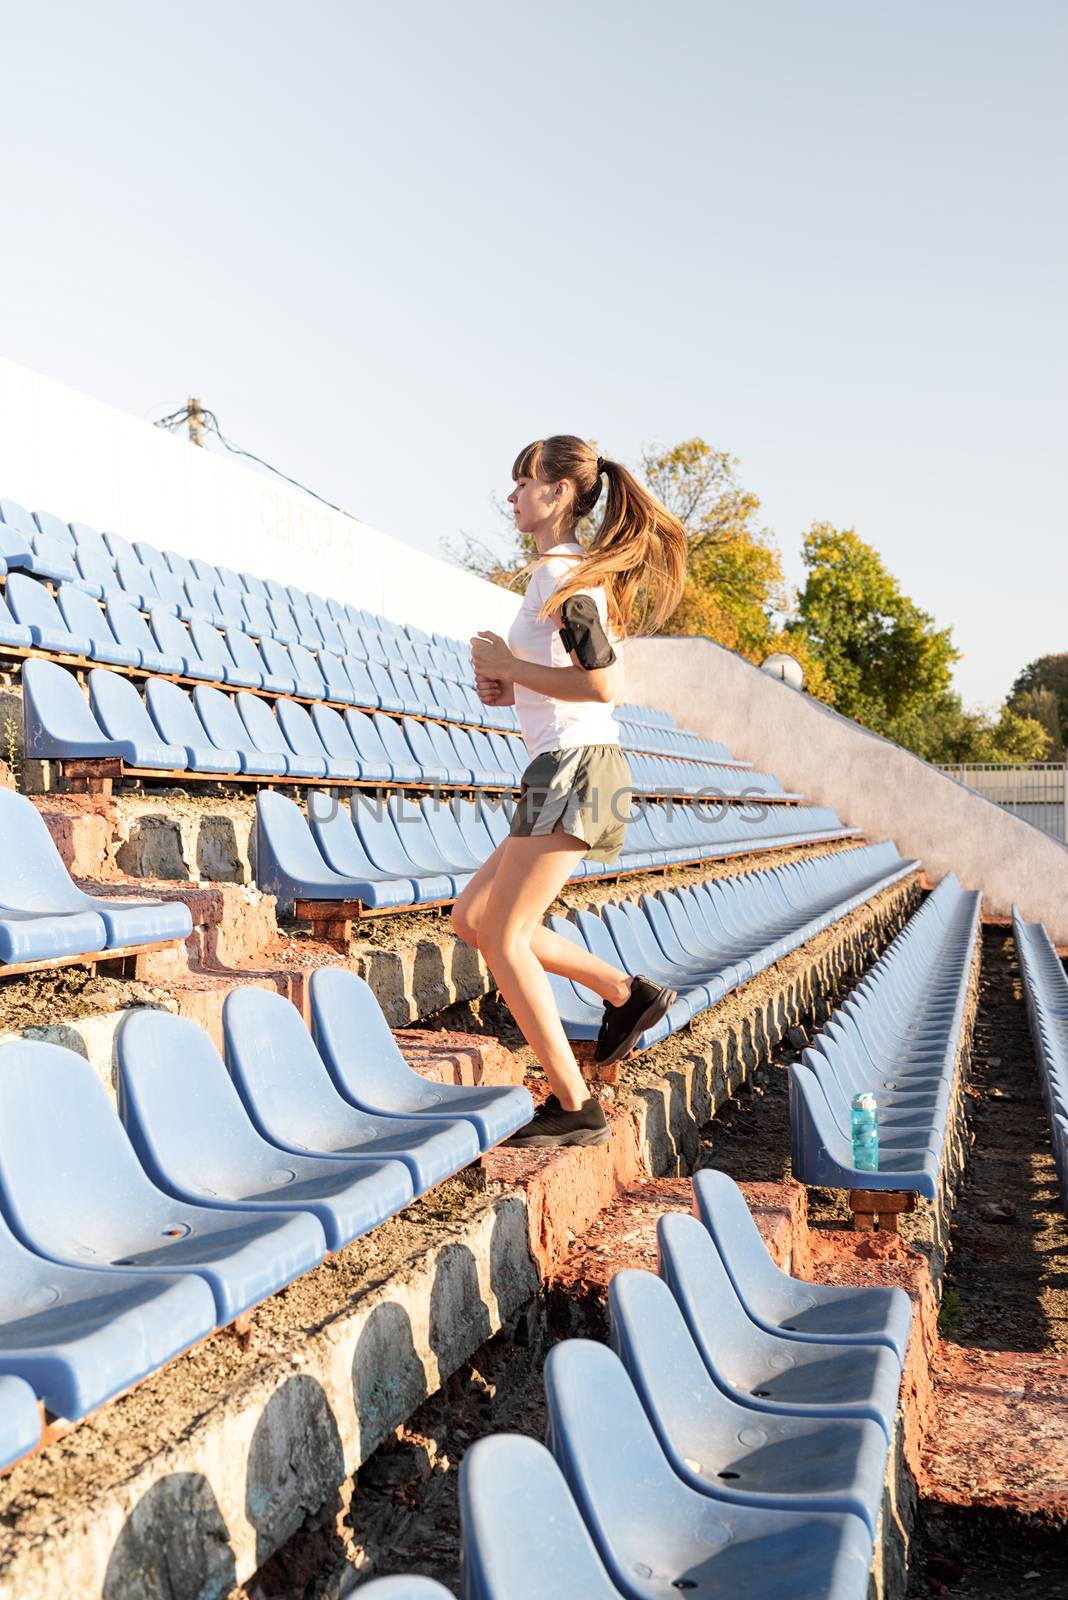 Active lifestyle. Teenager girl working out at the staduim running up the stairs